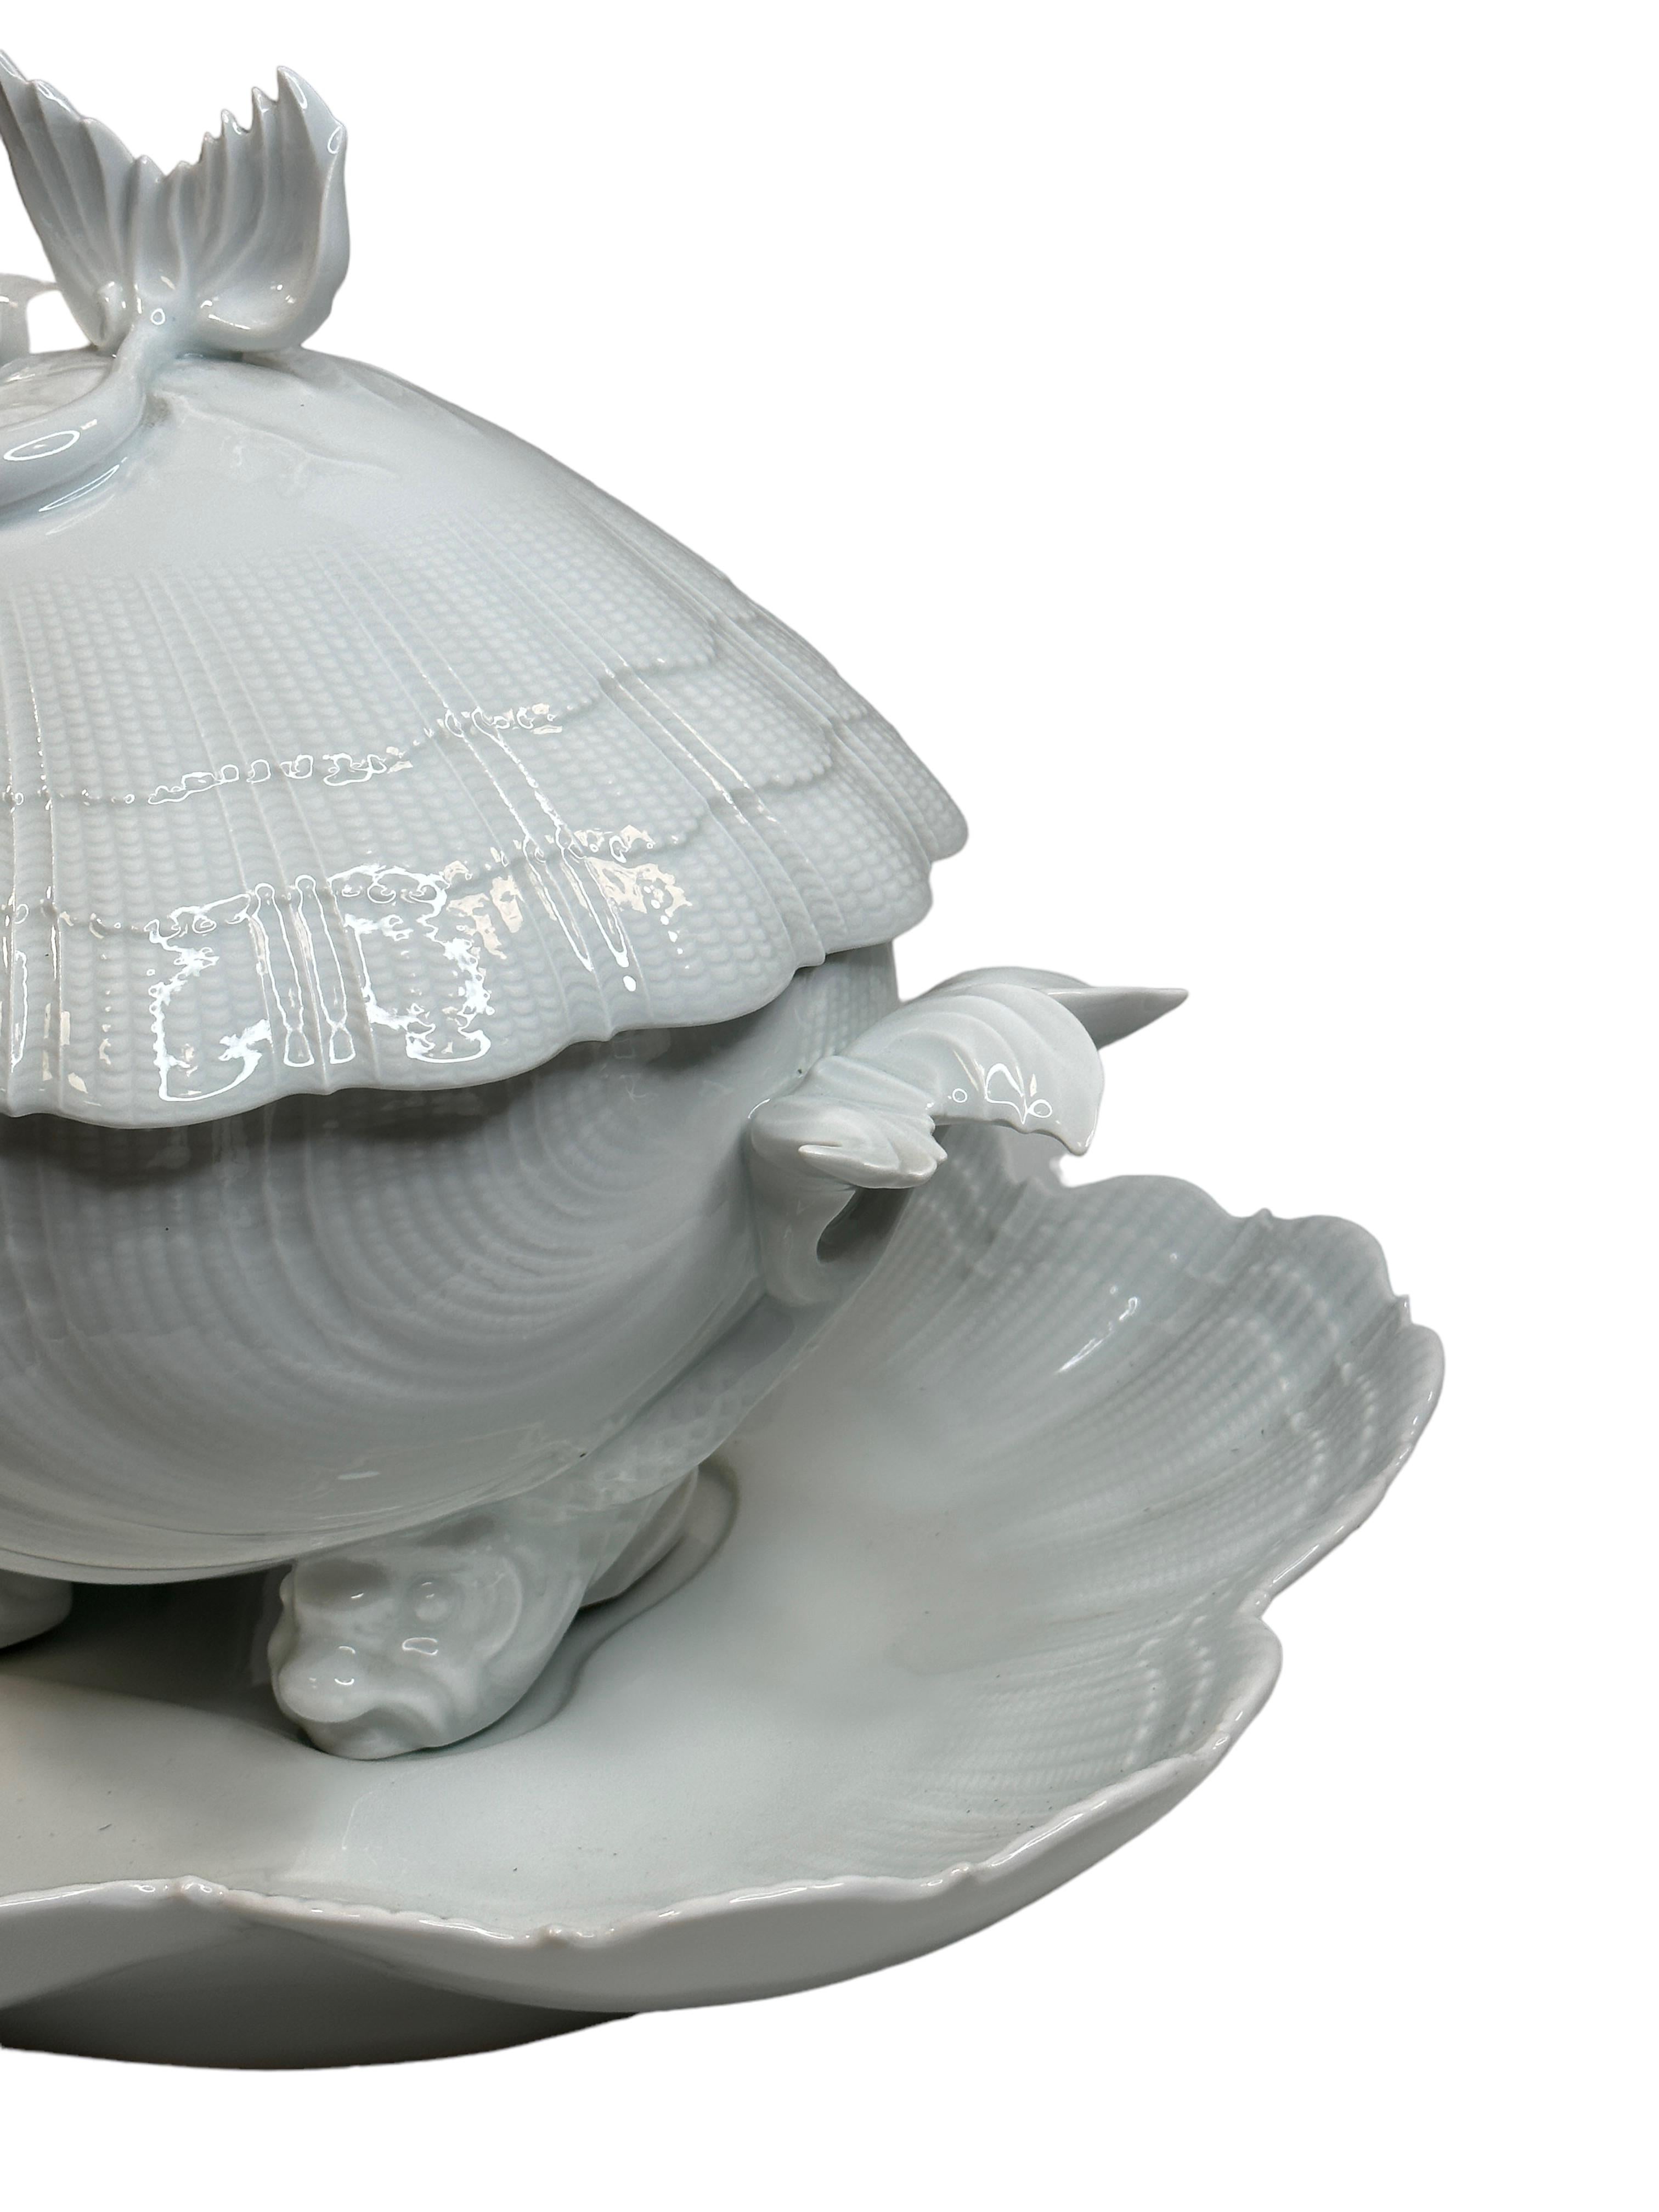 Exceptional Shell Shaped Limoges China Porcelain Soup Tureen with Dolphin Decor In Good Condition For Sale In Nuernberg, DE